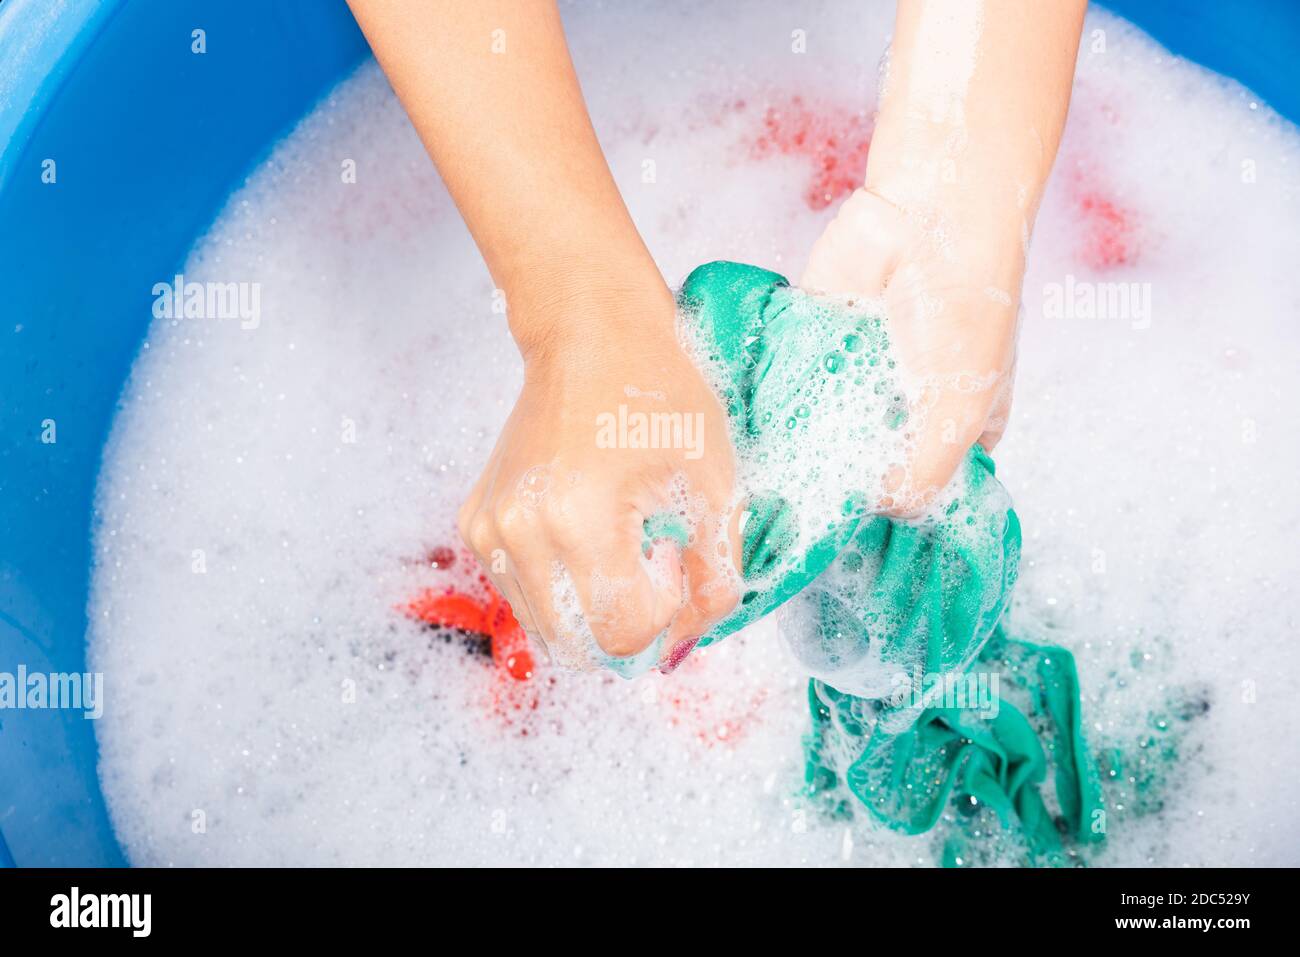 Closeup Womans Hands Handwashing Clothes in Red Plastic Washbucket,  Scrubbing and Squeezing Fabrics, Laundry Housework Concept Stock Image -  Image of household, indoors: 76923119